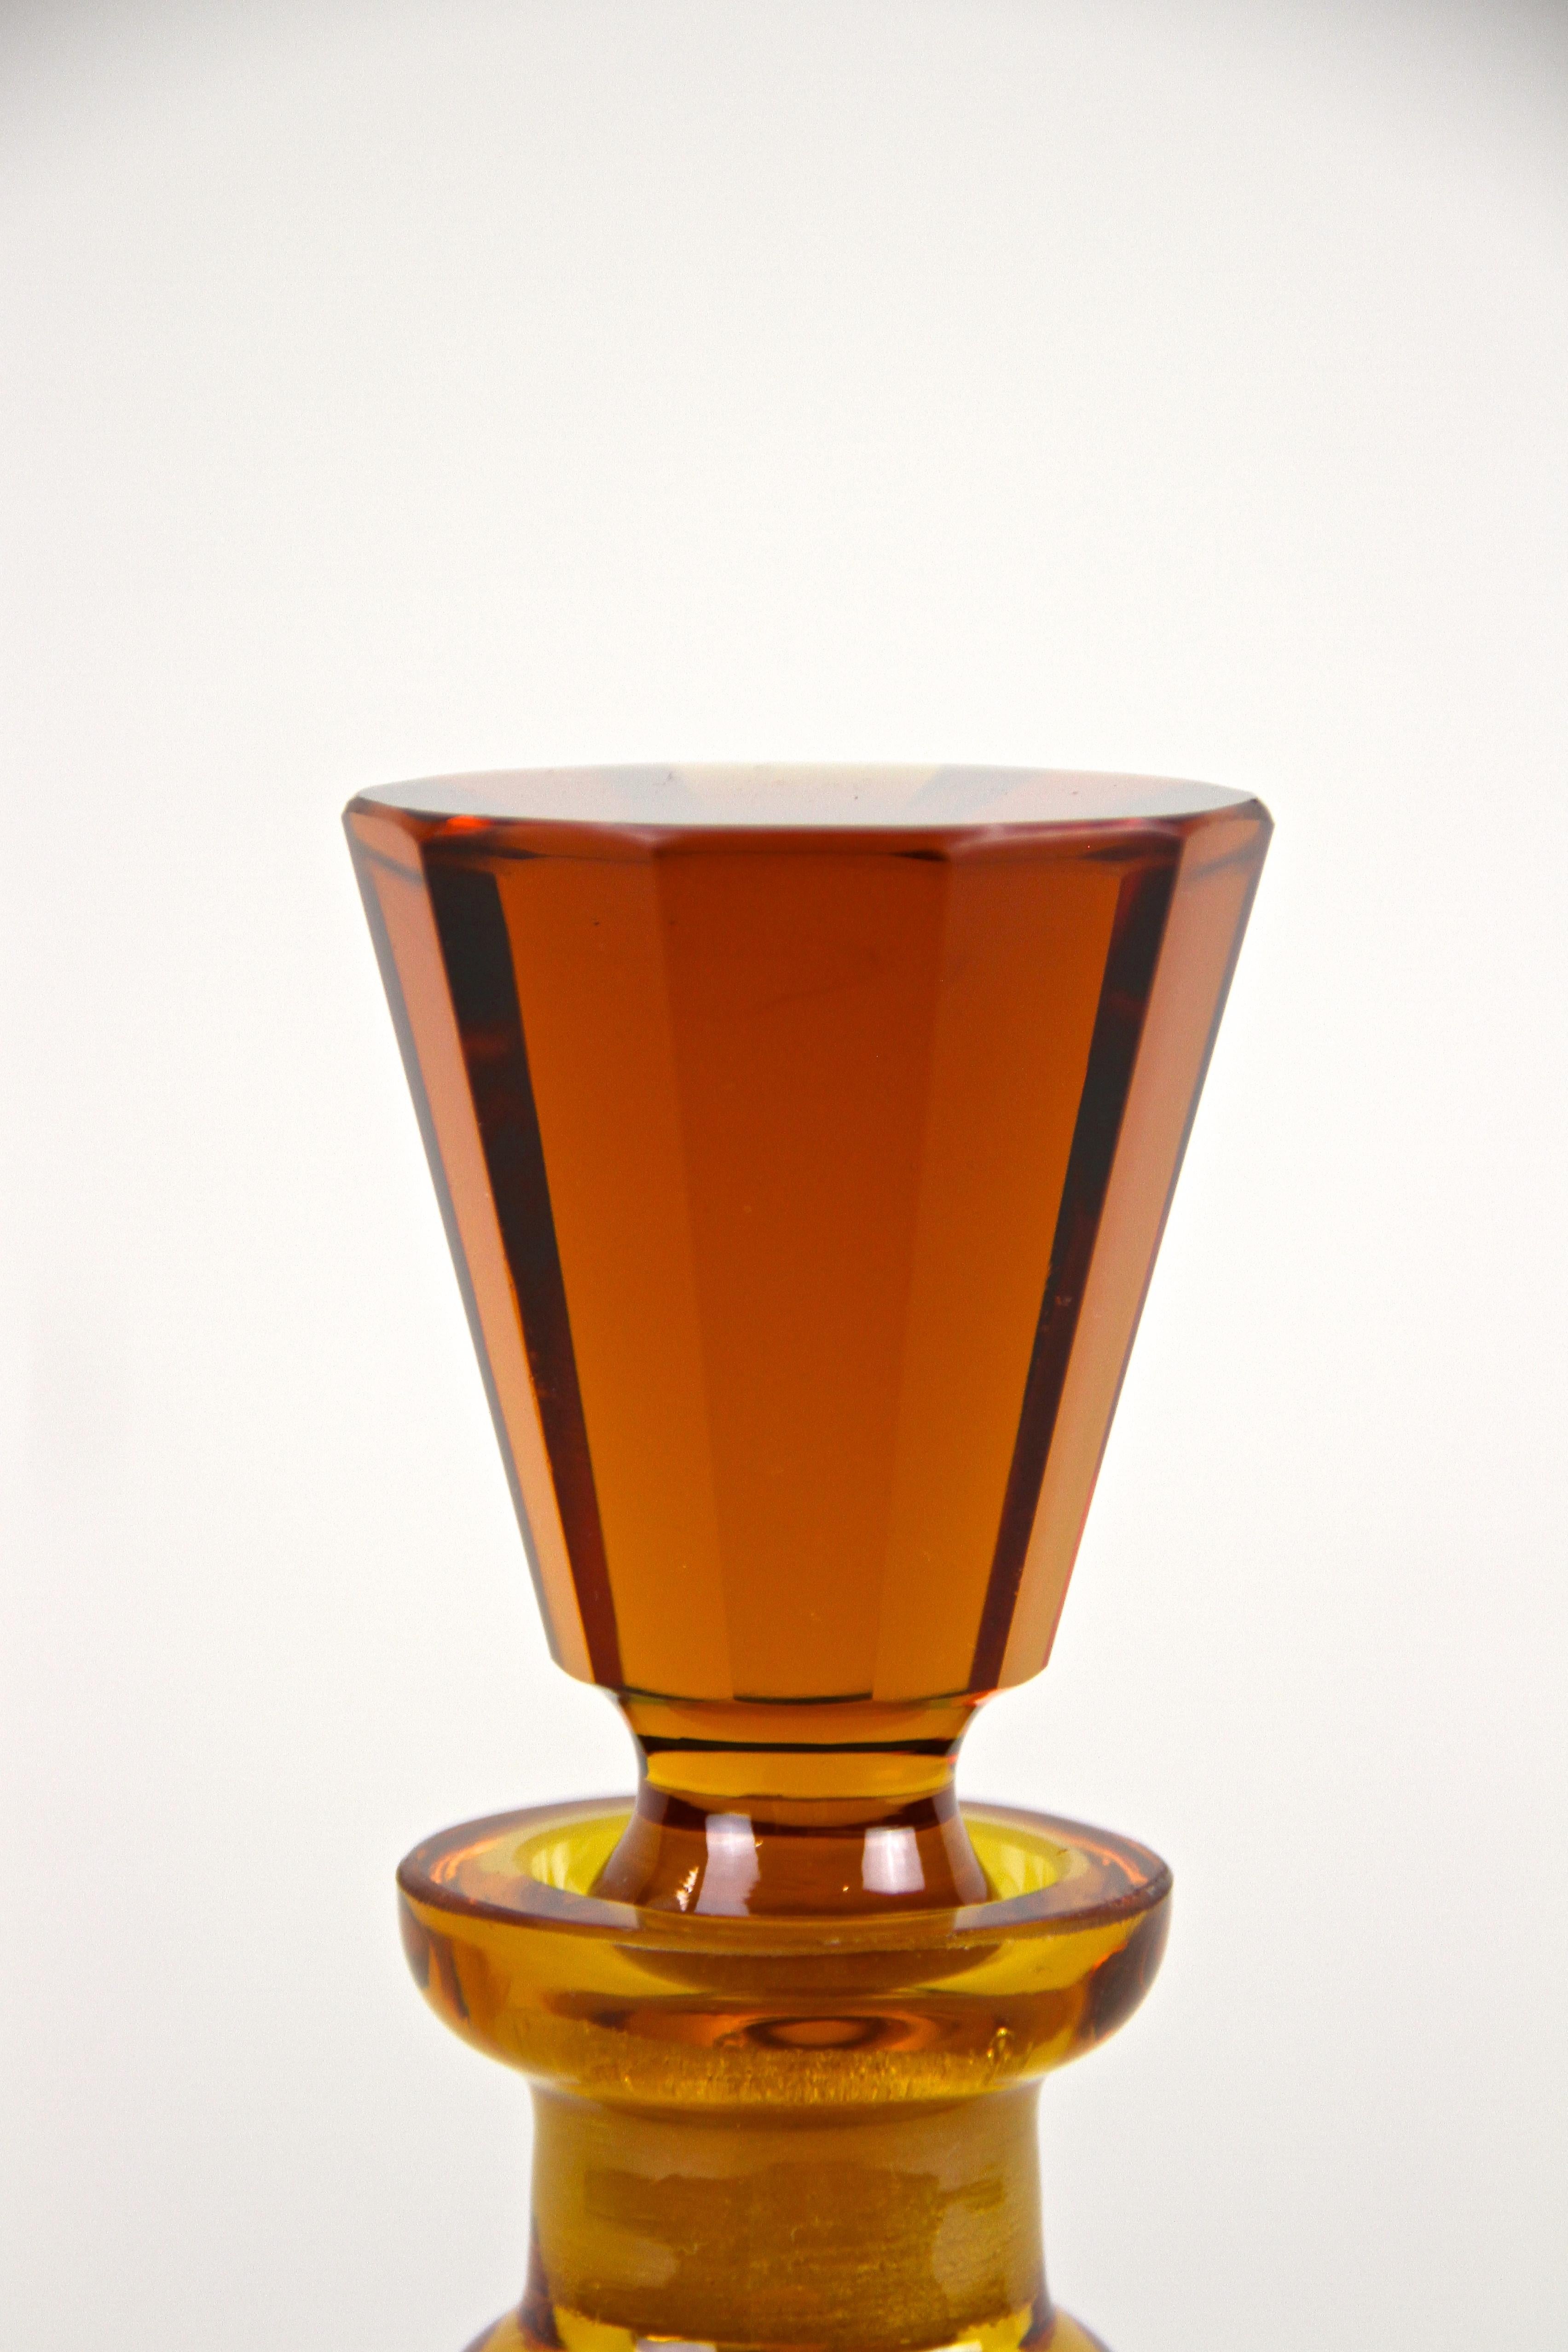 Lovely amber-colored Art Deco glass bottle from the early Art Deco period around 1920 in Austria. The artfully designed glass bottle bottle with edges and curves comes with a fantastic shaped stopper. A really impressive piece of austrian glass art